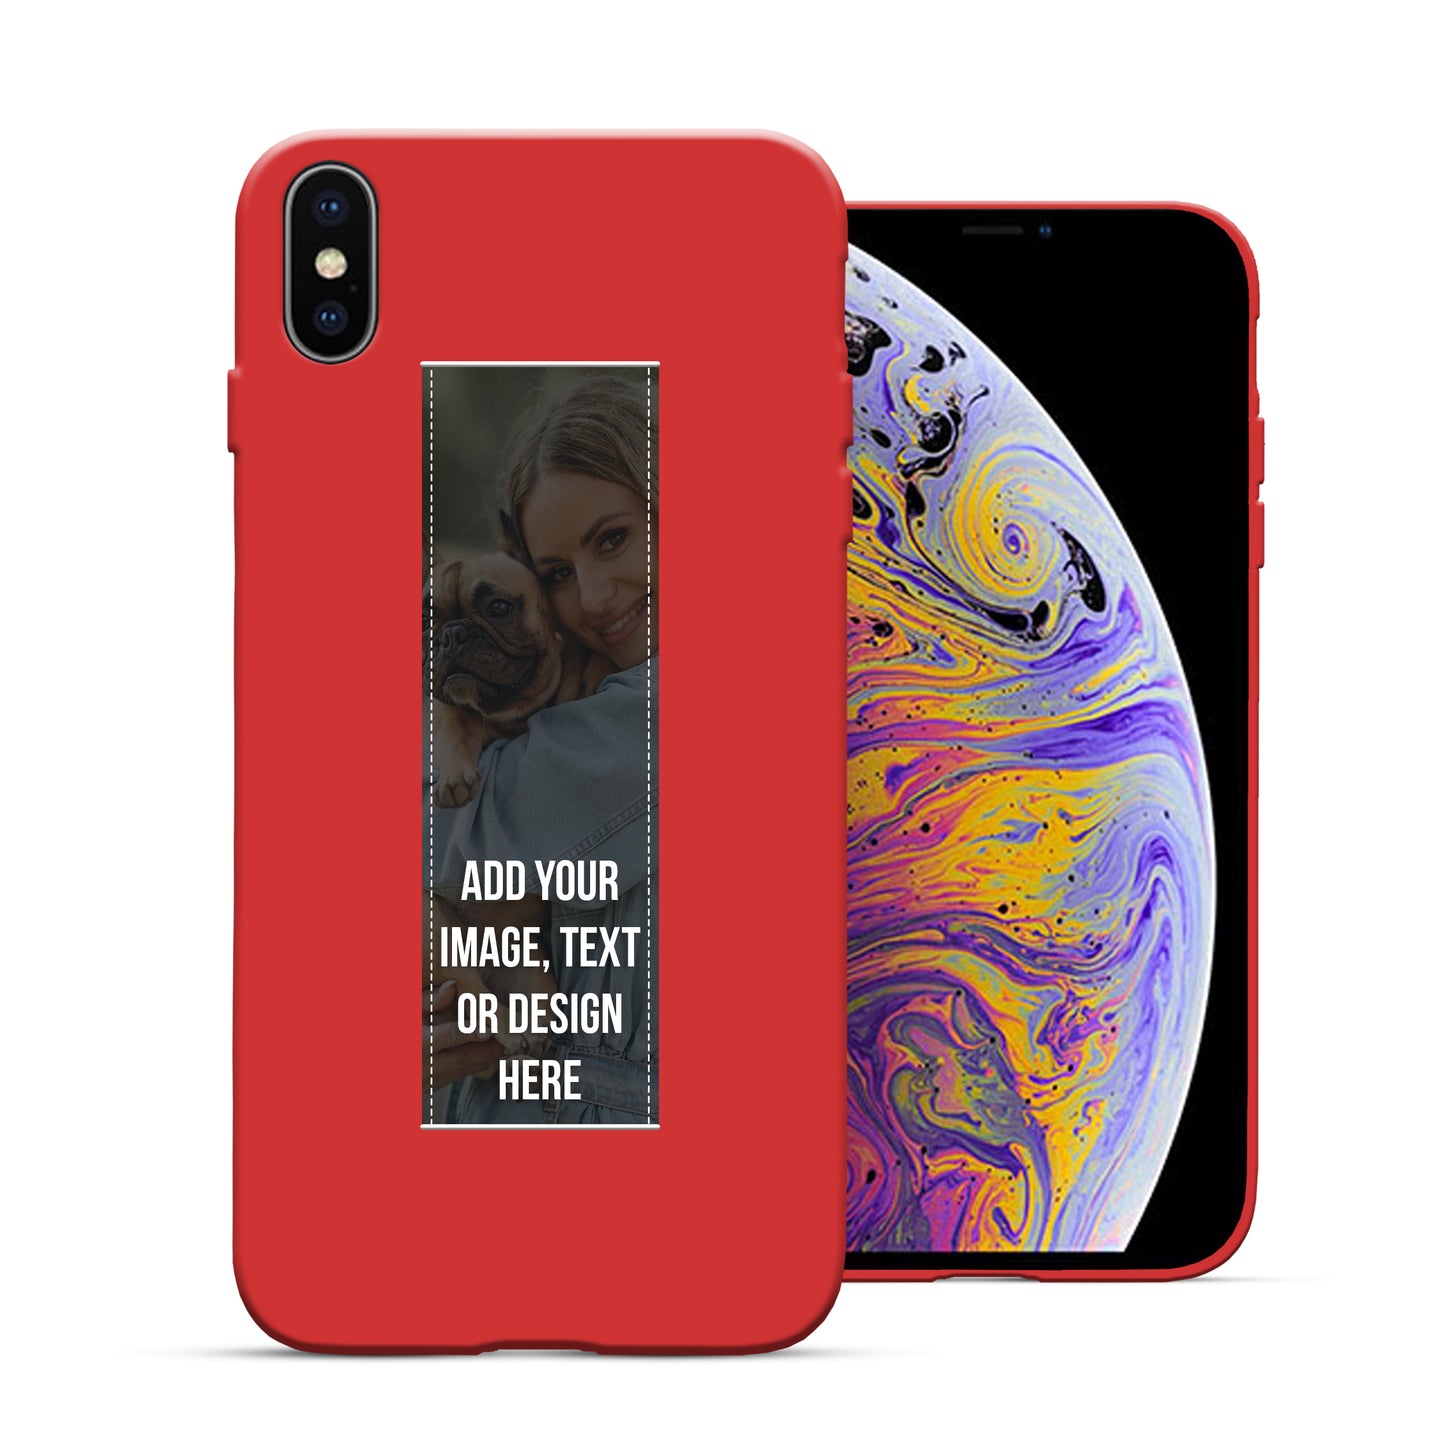 Finger Loop Phone Case For iPhone XS Max Black With Custom Strap